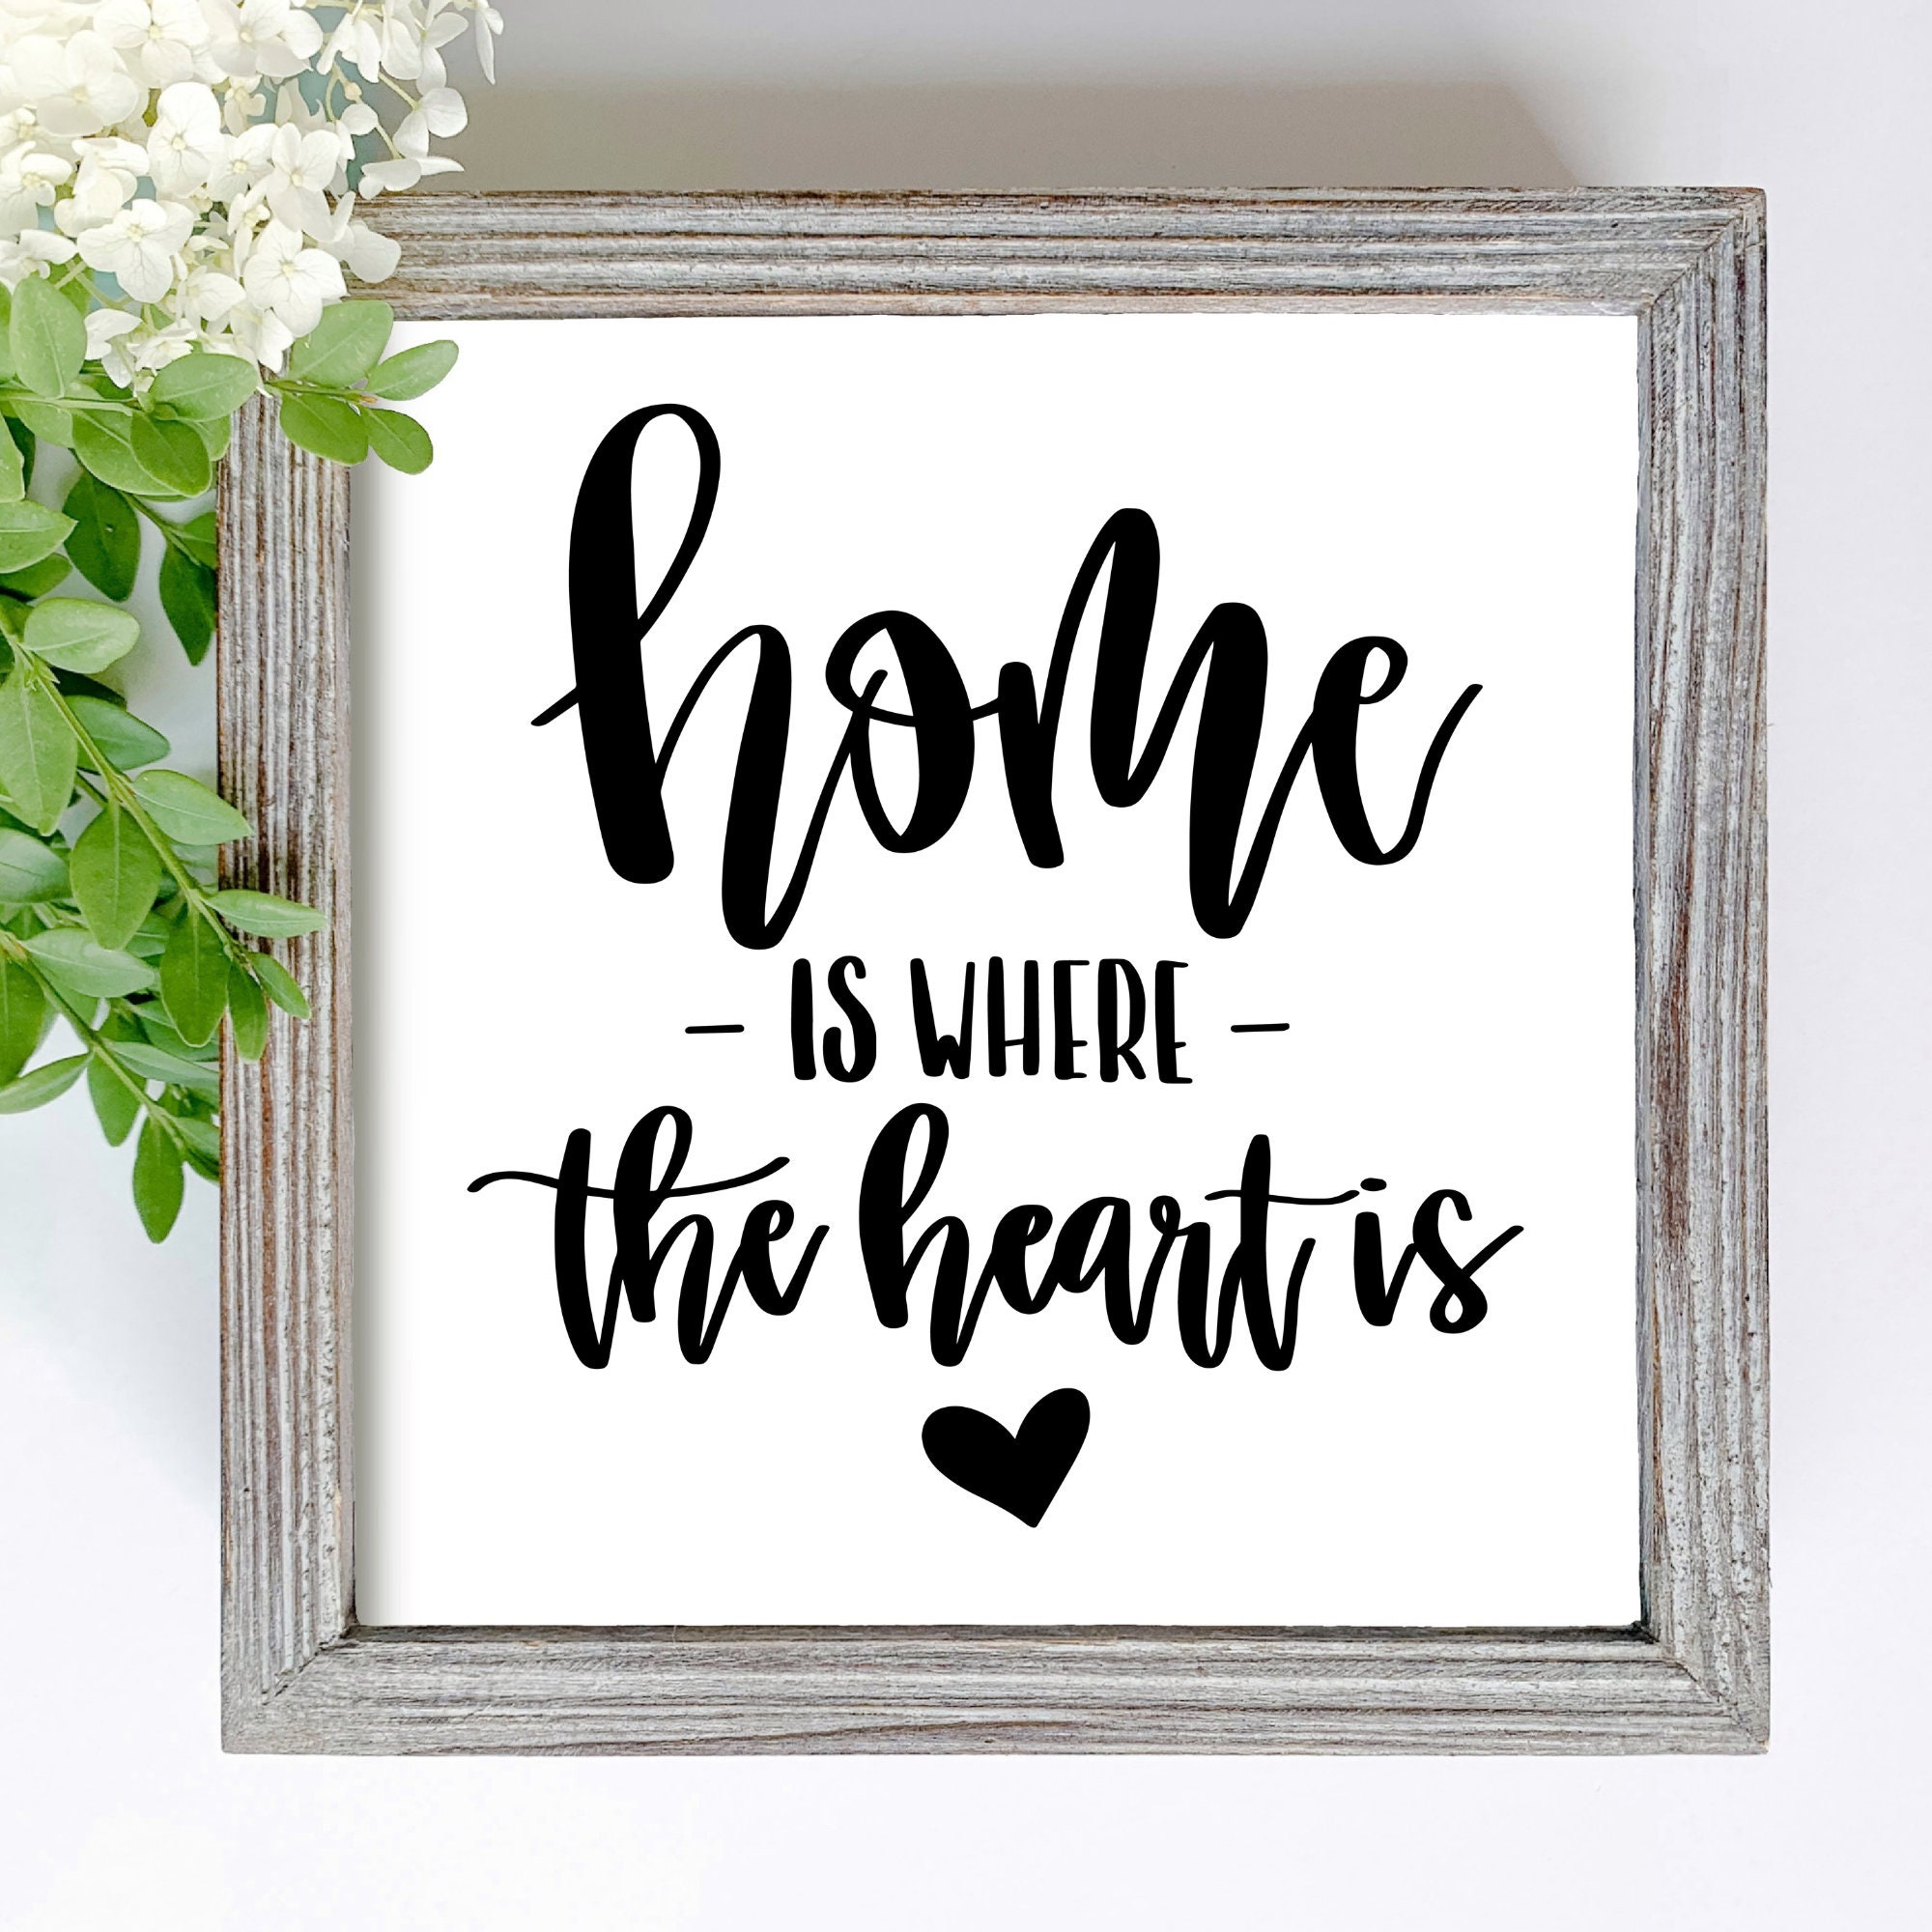 Home is Where the Heart Is SVG, Family SVG, Home Decor Svg, Png, Eps, Dxf,  Cricut, Cut Files, Silhouette Files, Download, Print